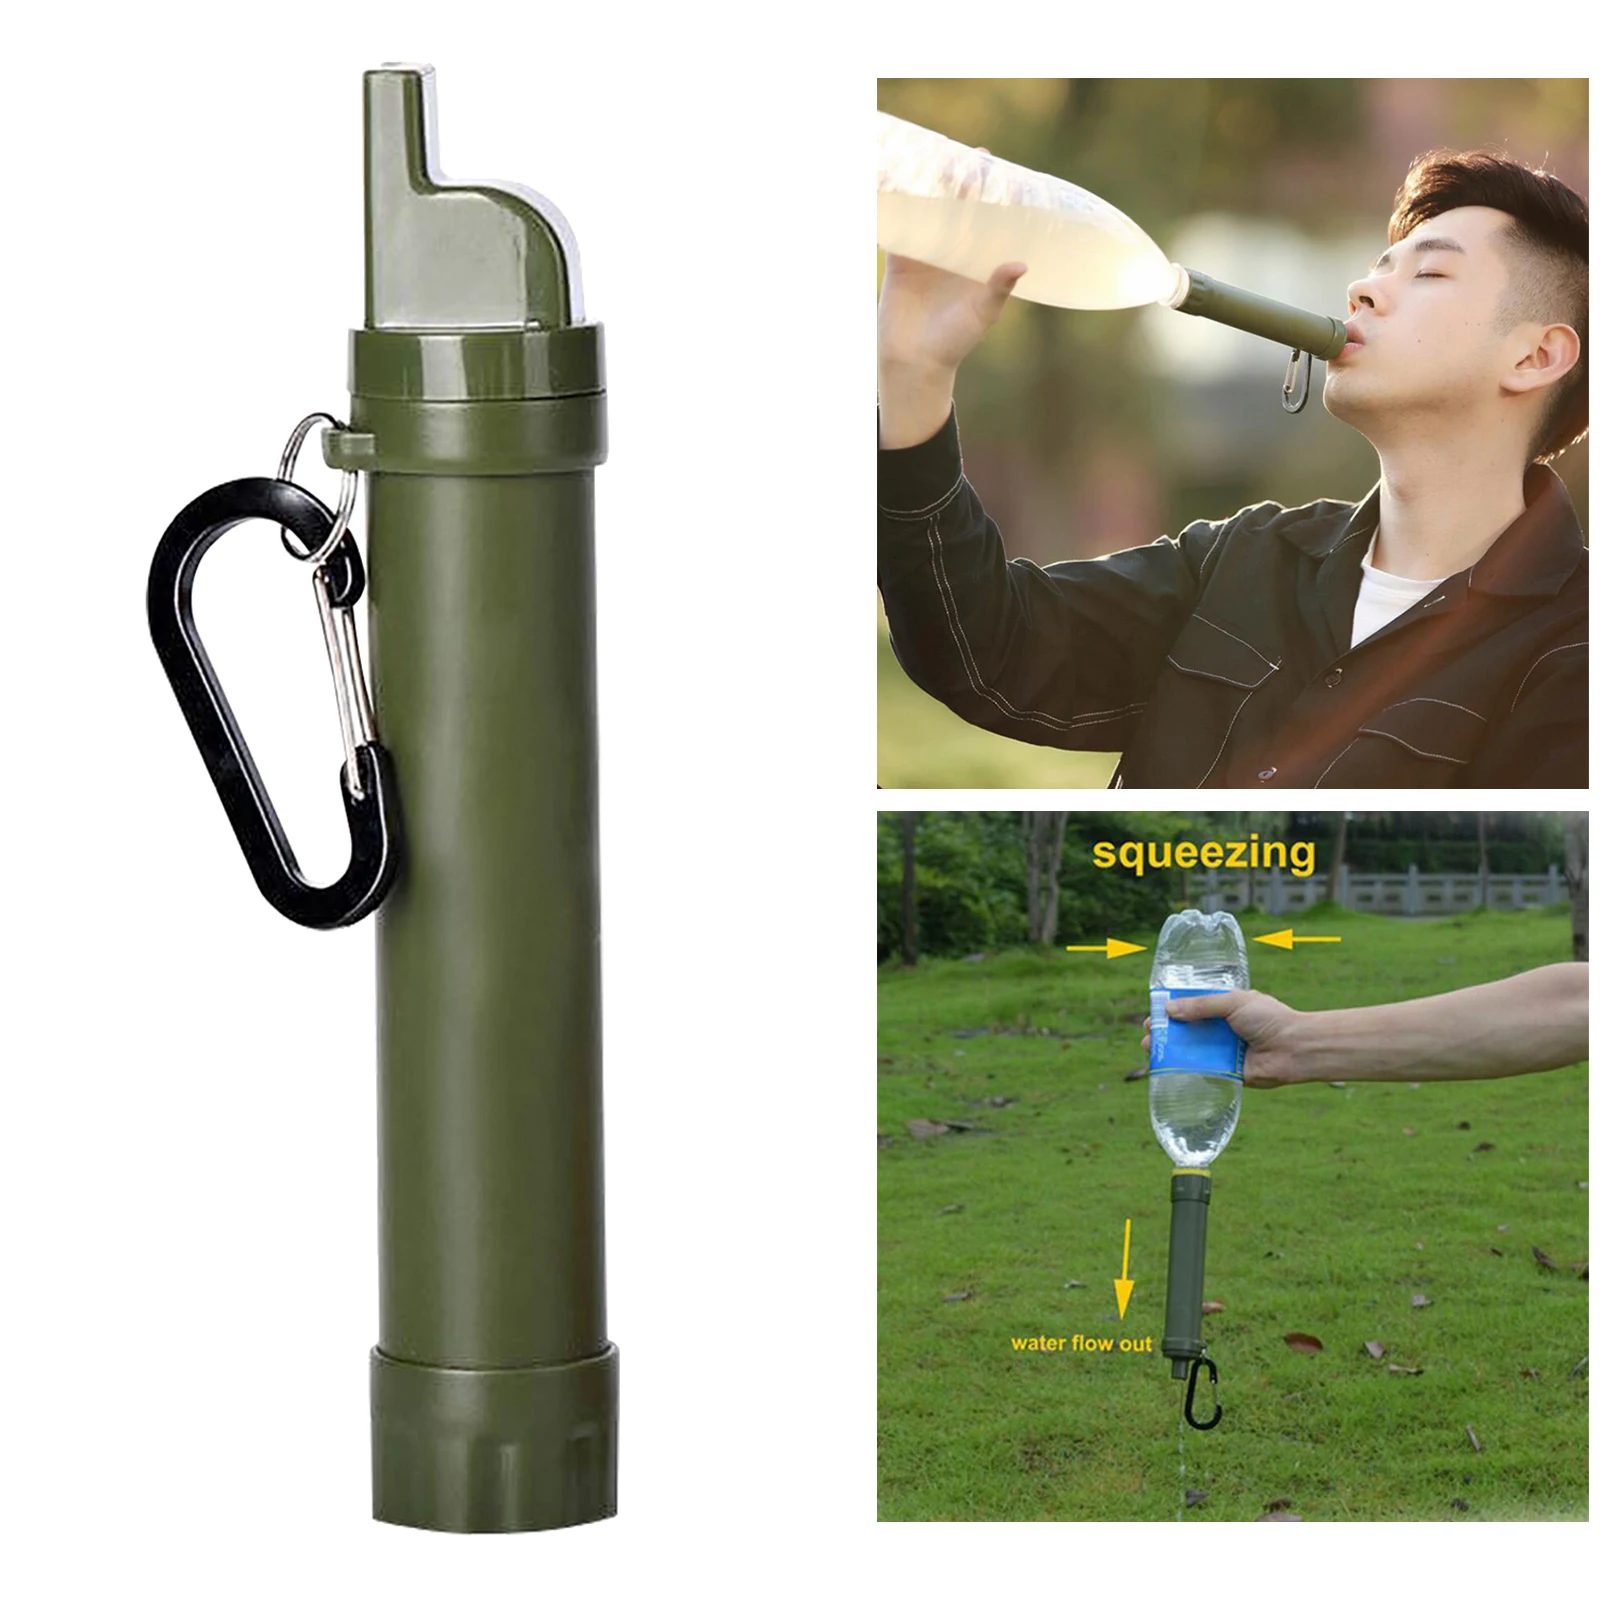 Portable Survival Water Filter Straw Purifier Camping Emergency Gear